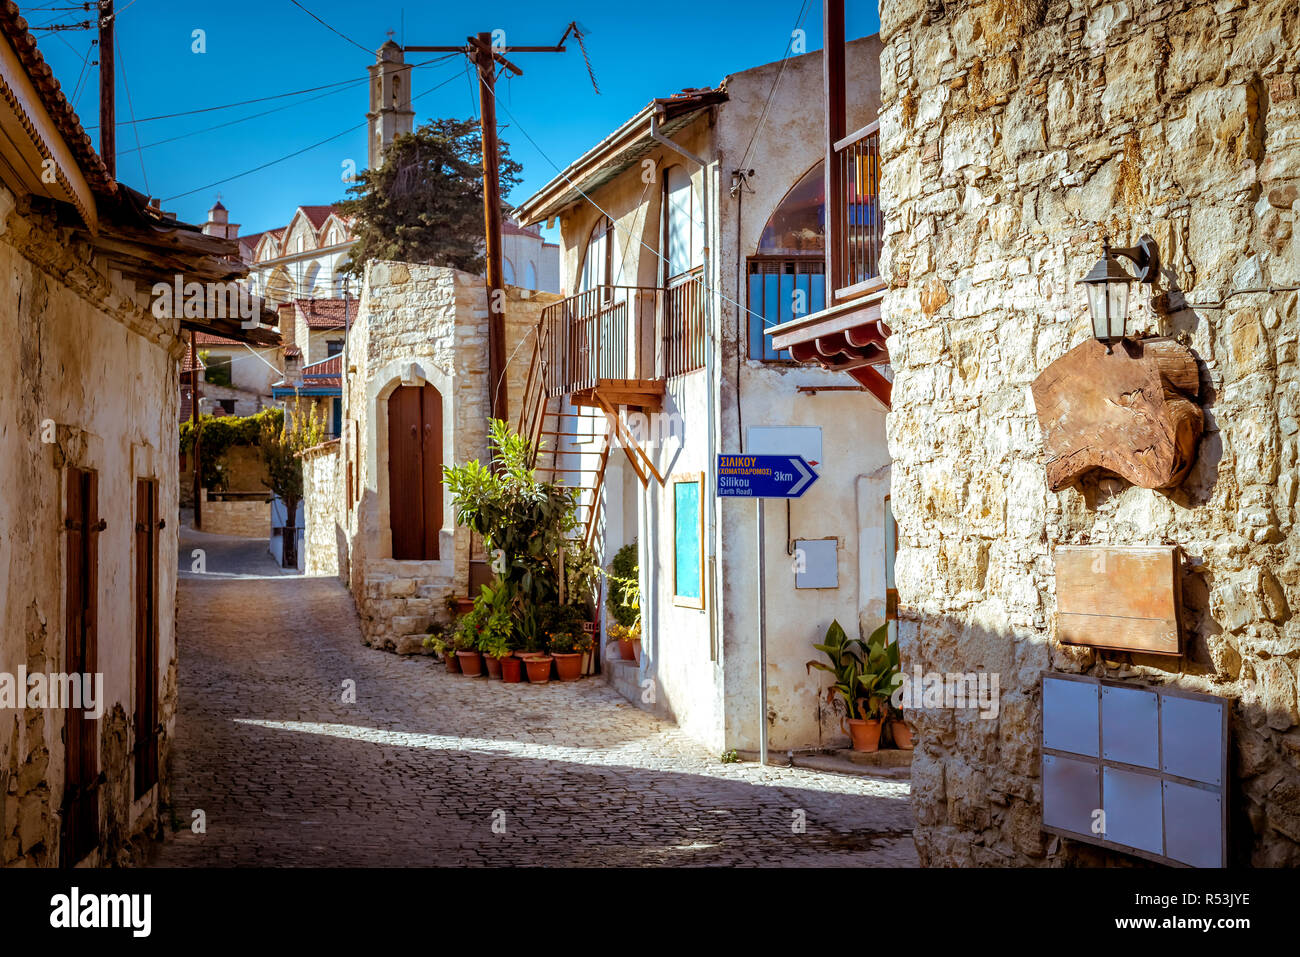 Old stone houses on a narrow street in the picturesque medieval city of Lofou. Limassol District, Cyprus. Stock Photo